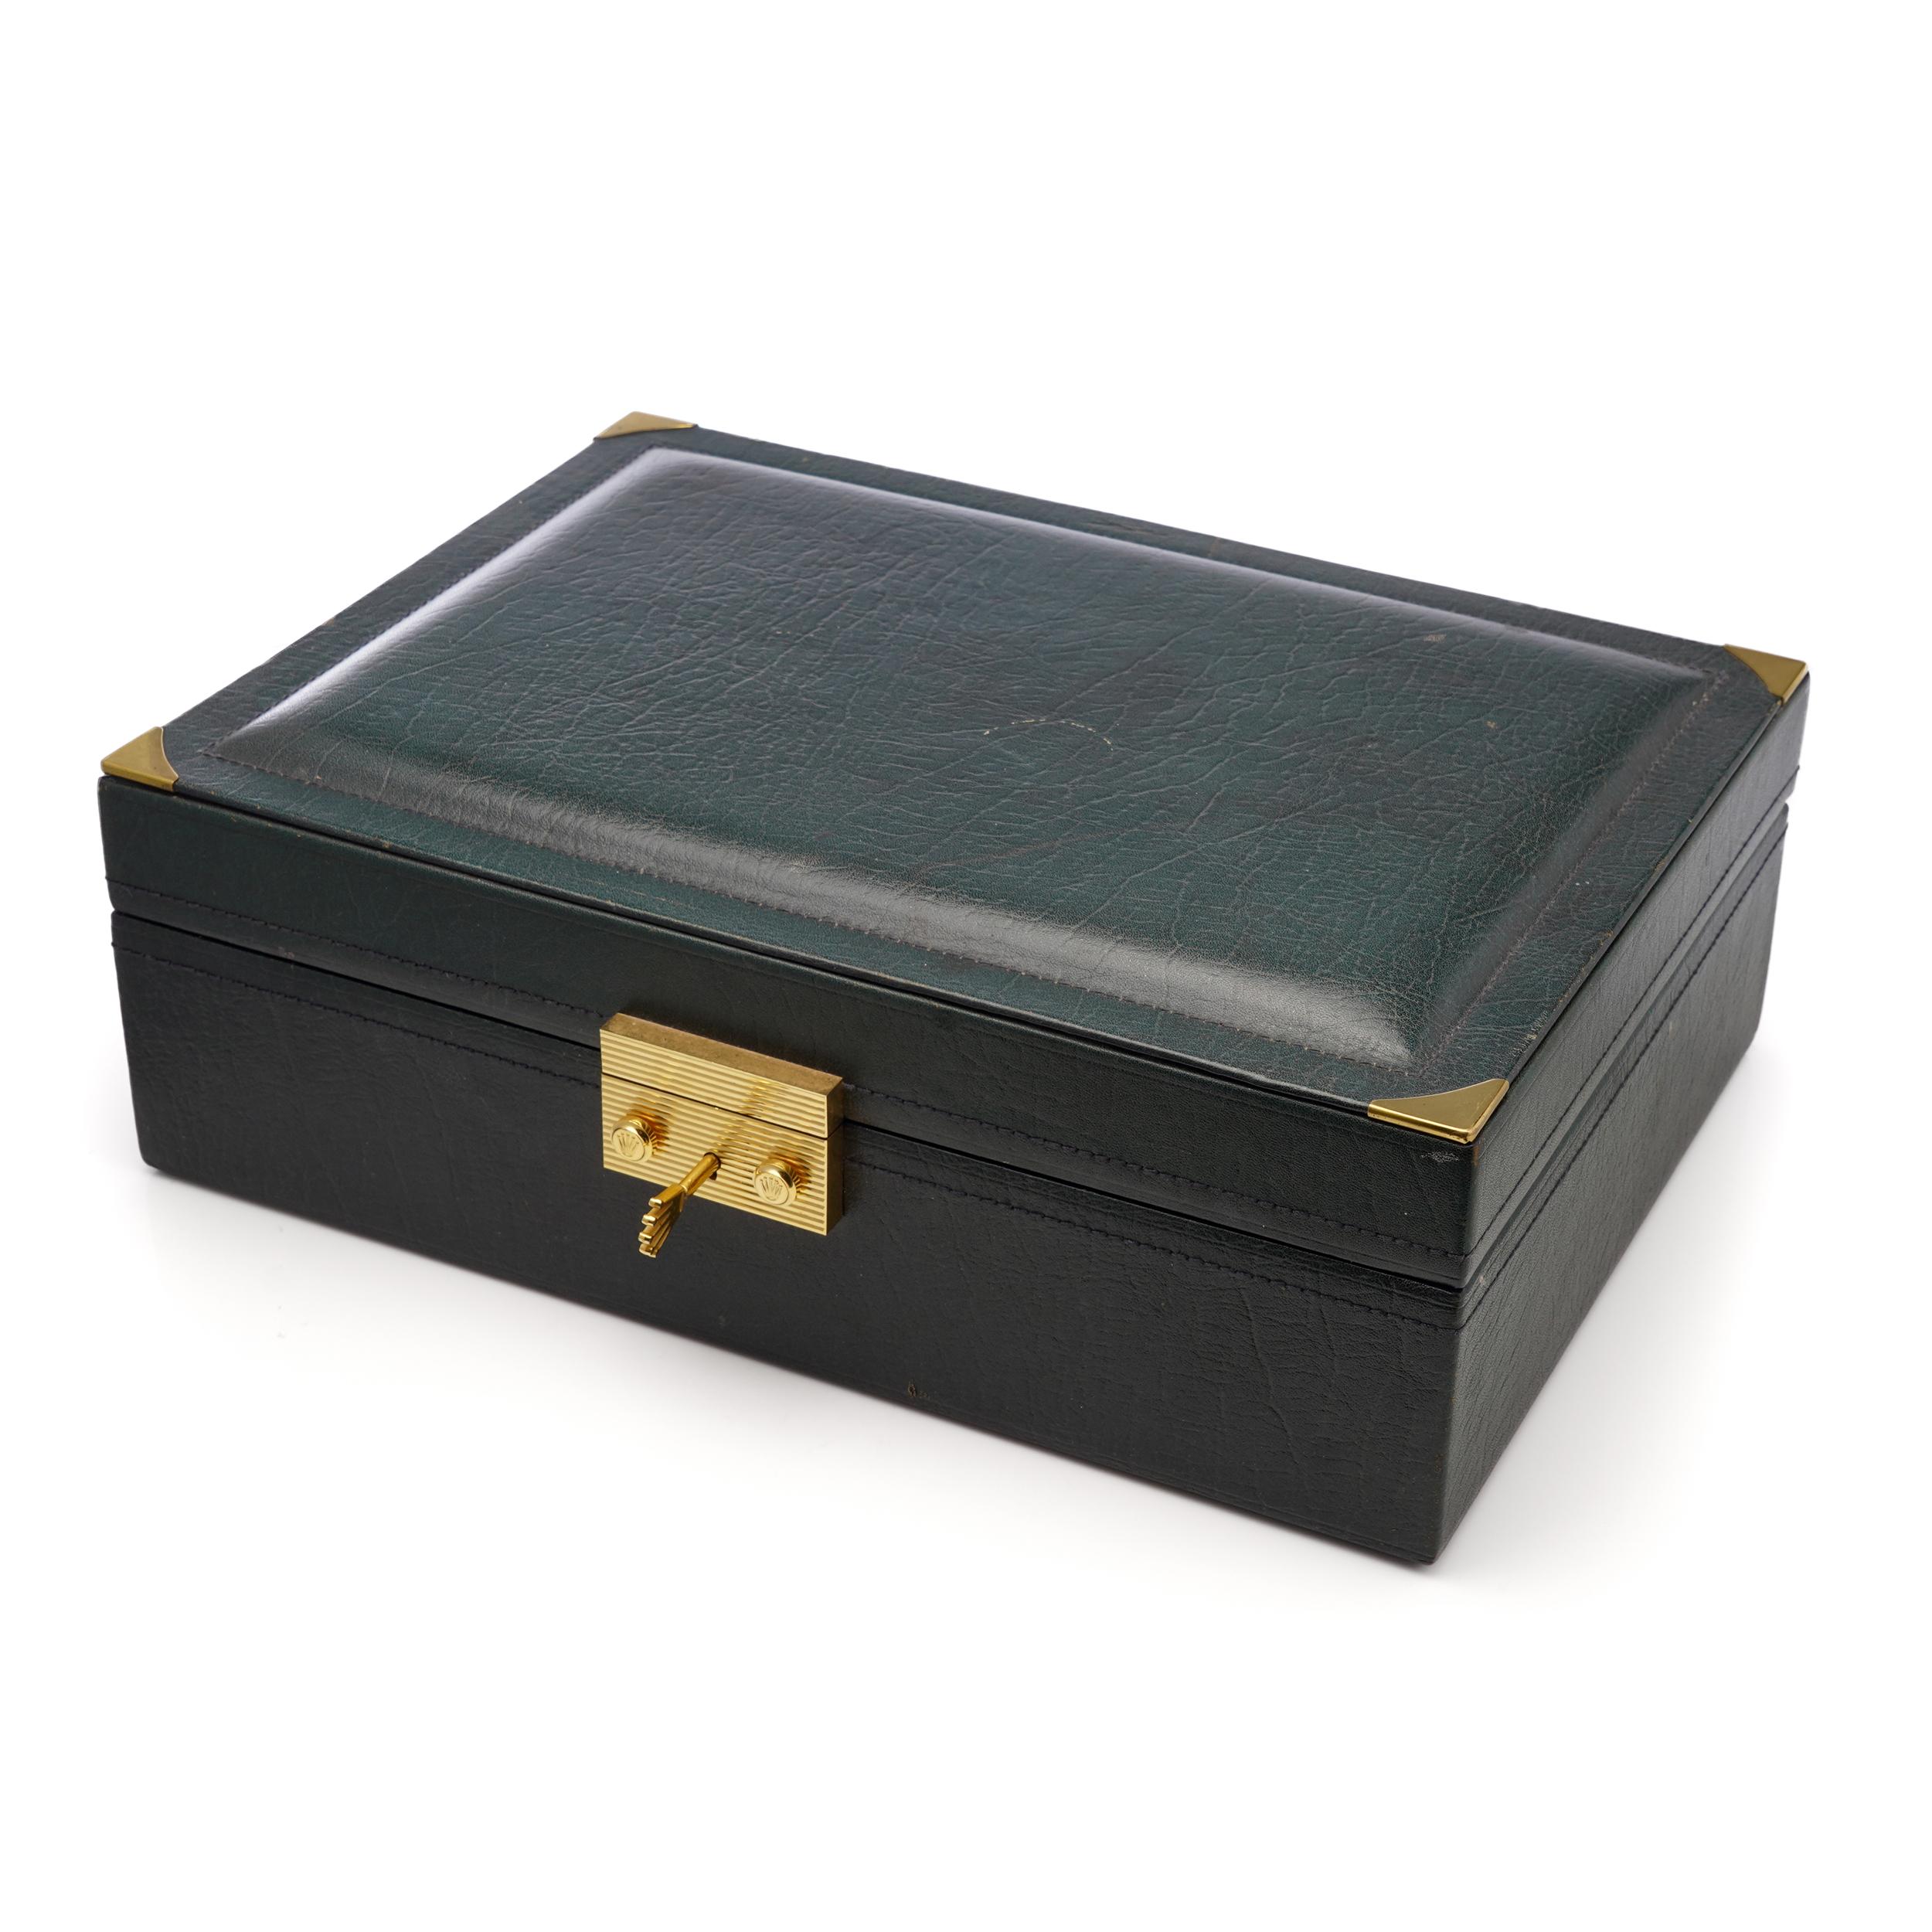 Rolex Jumbo Presentation Watch Jewelry Box Montres Rolex S.A. 51.00.01

This exquisite Rolex vintage classic green leather watch and jewellery box epitomizes timeless elegance and sophistication. Crafted with precision, the box boasts a rich green